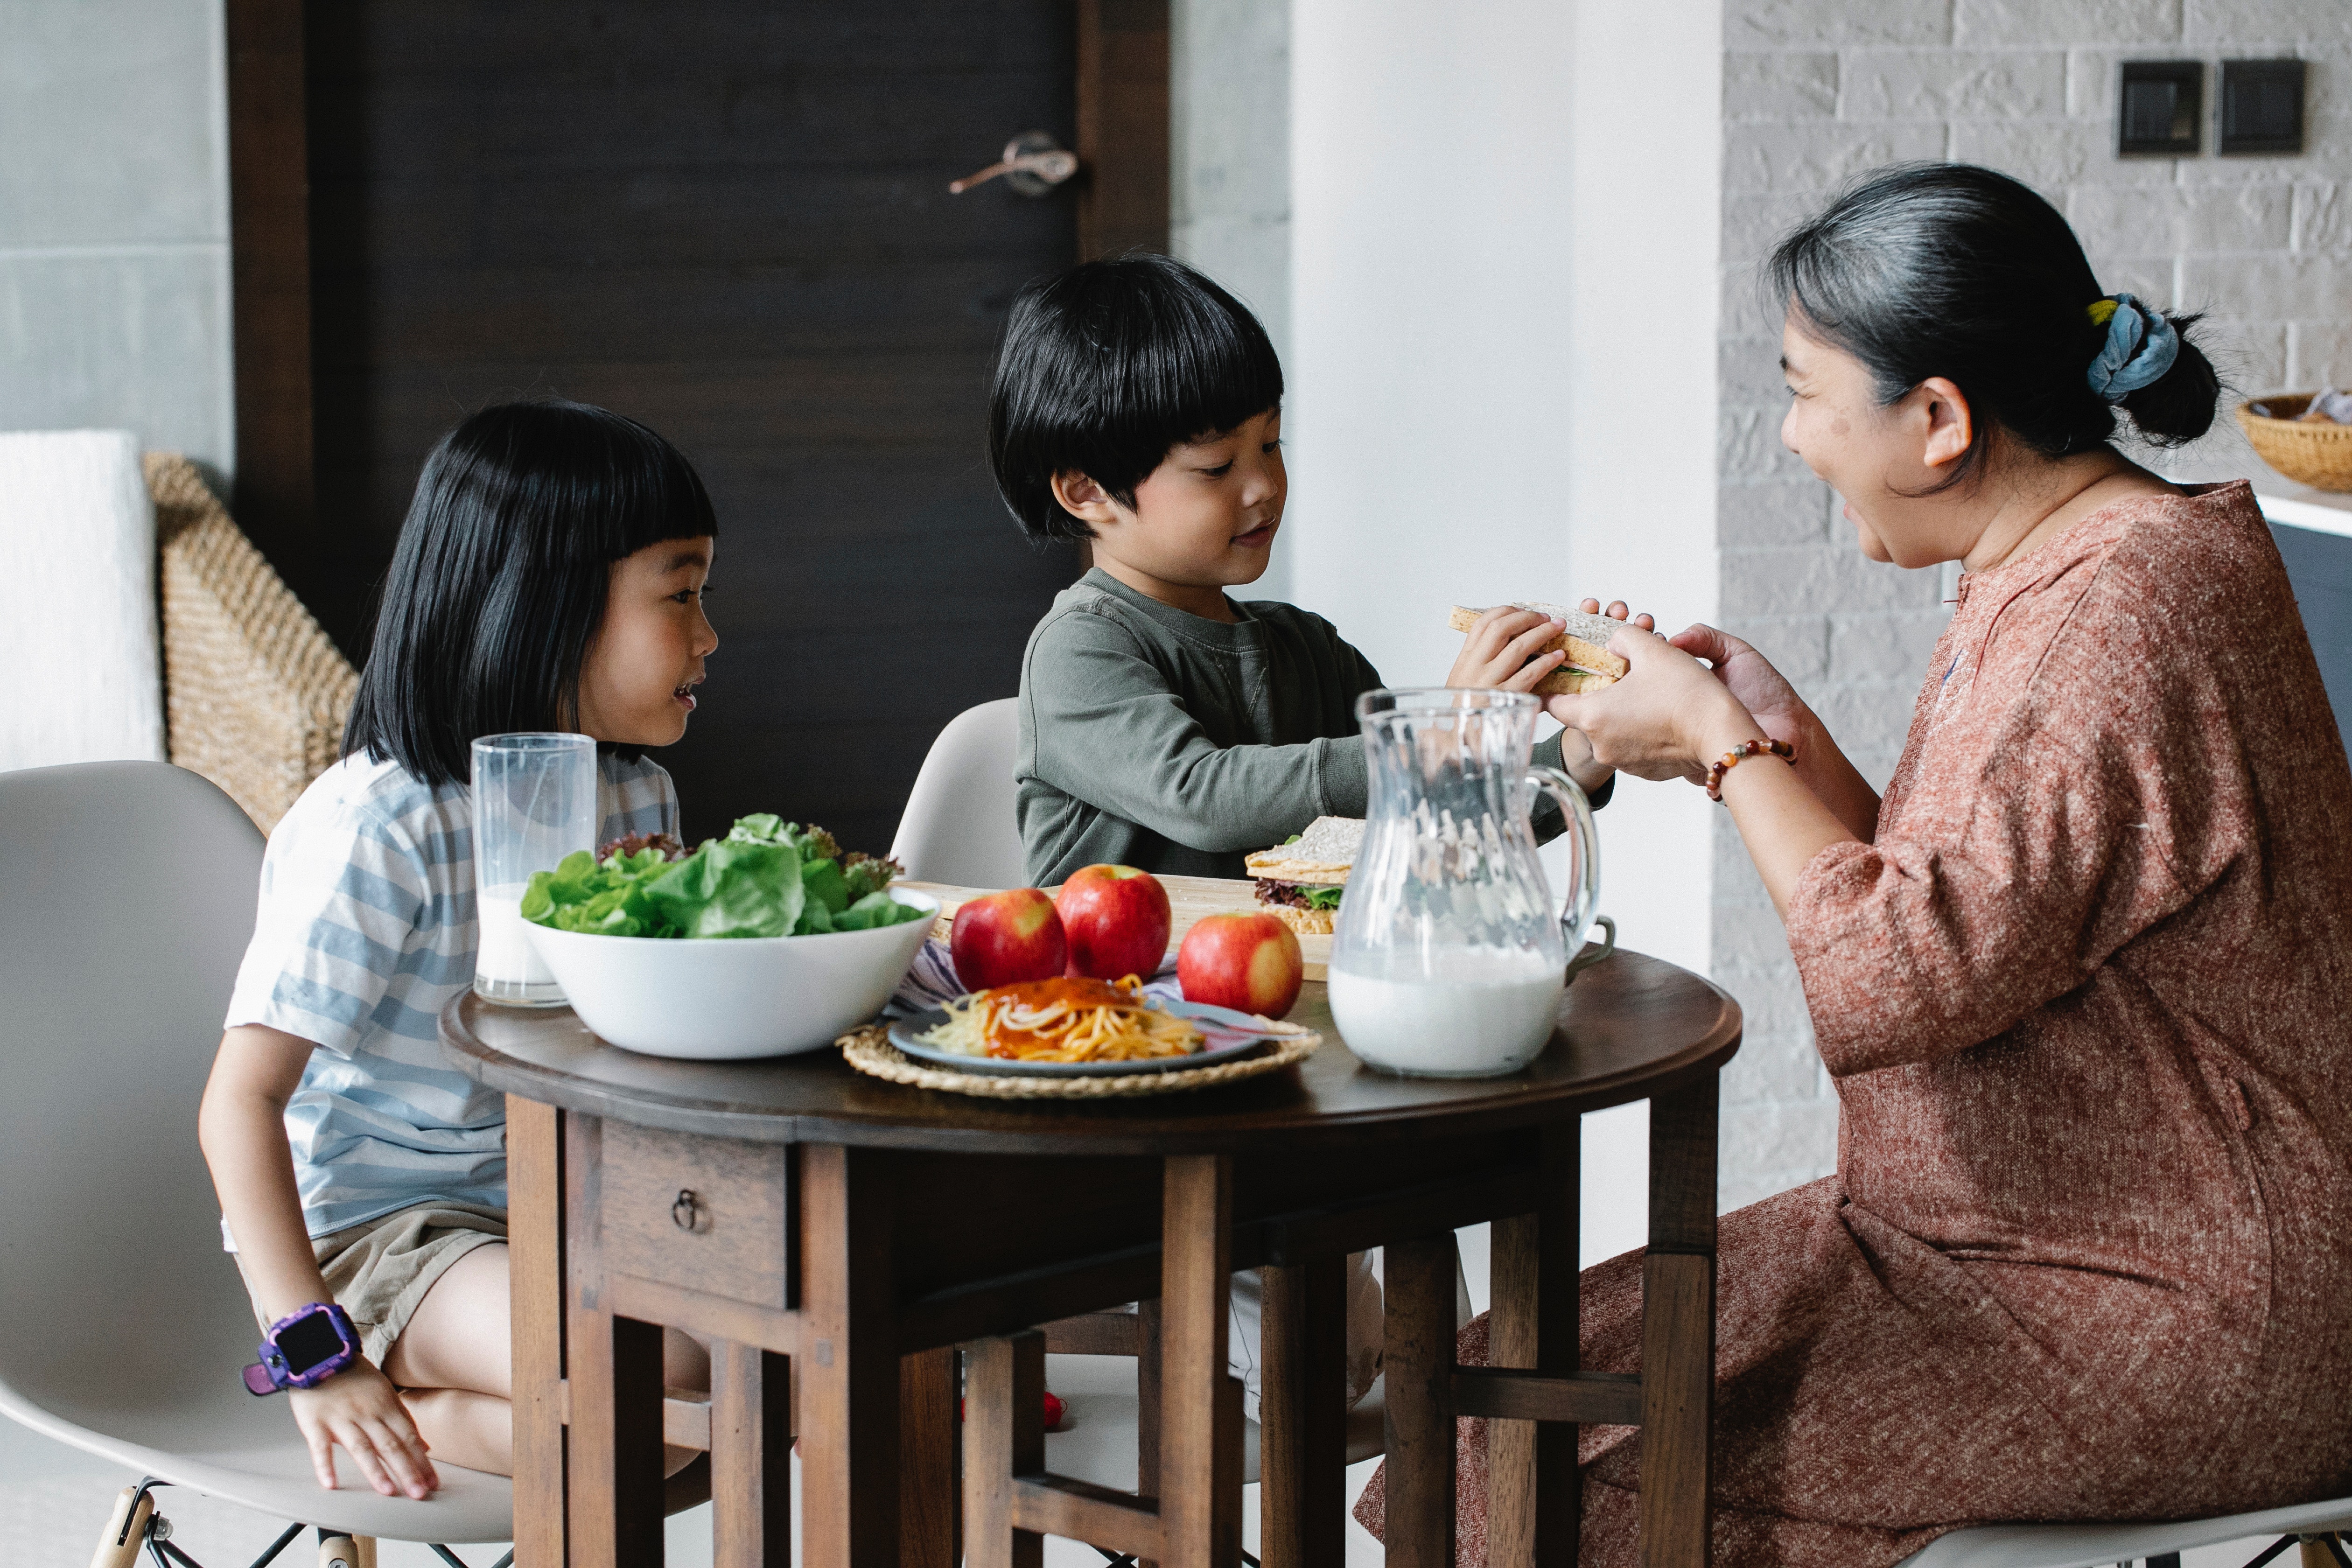 Photo by Alex Green from Pexels. A maternal figure sitting at a small table with two young children. On the table are a pitcher of milk, a bowl of lettuce and several apples. The adult is handing one of the children a sandwich.